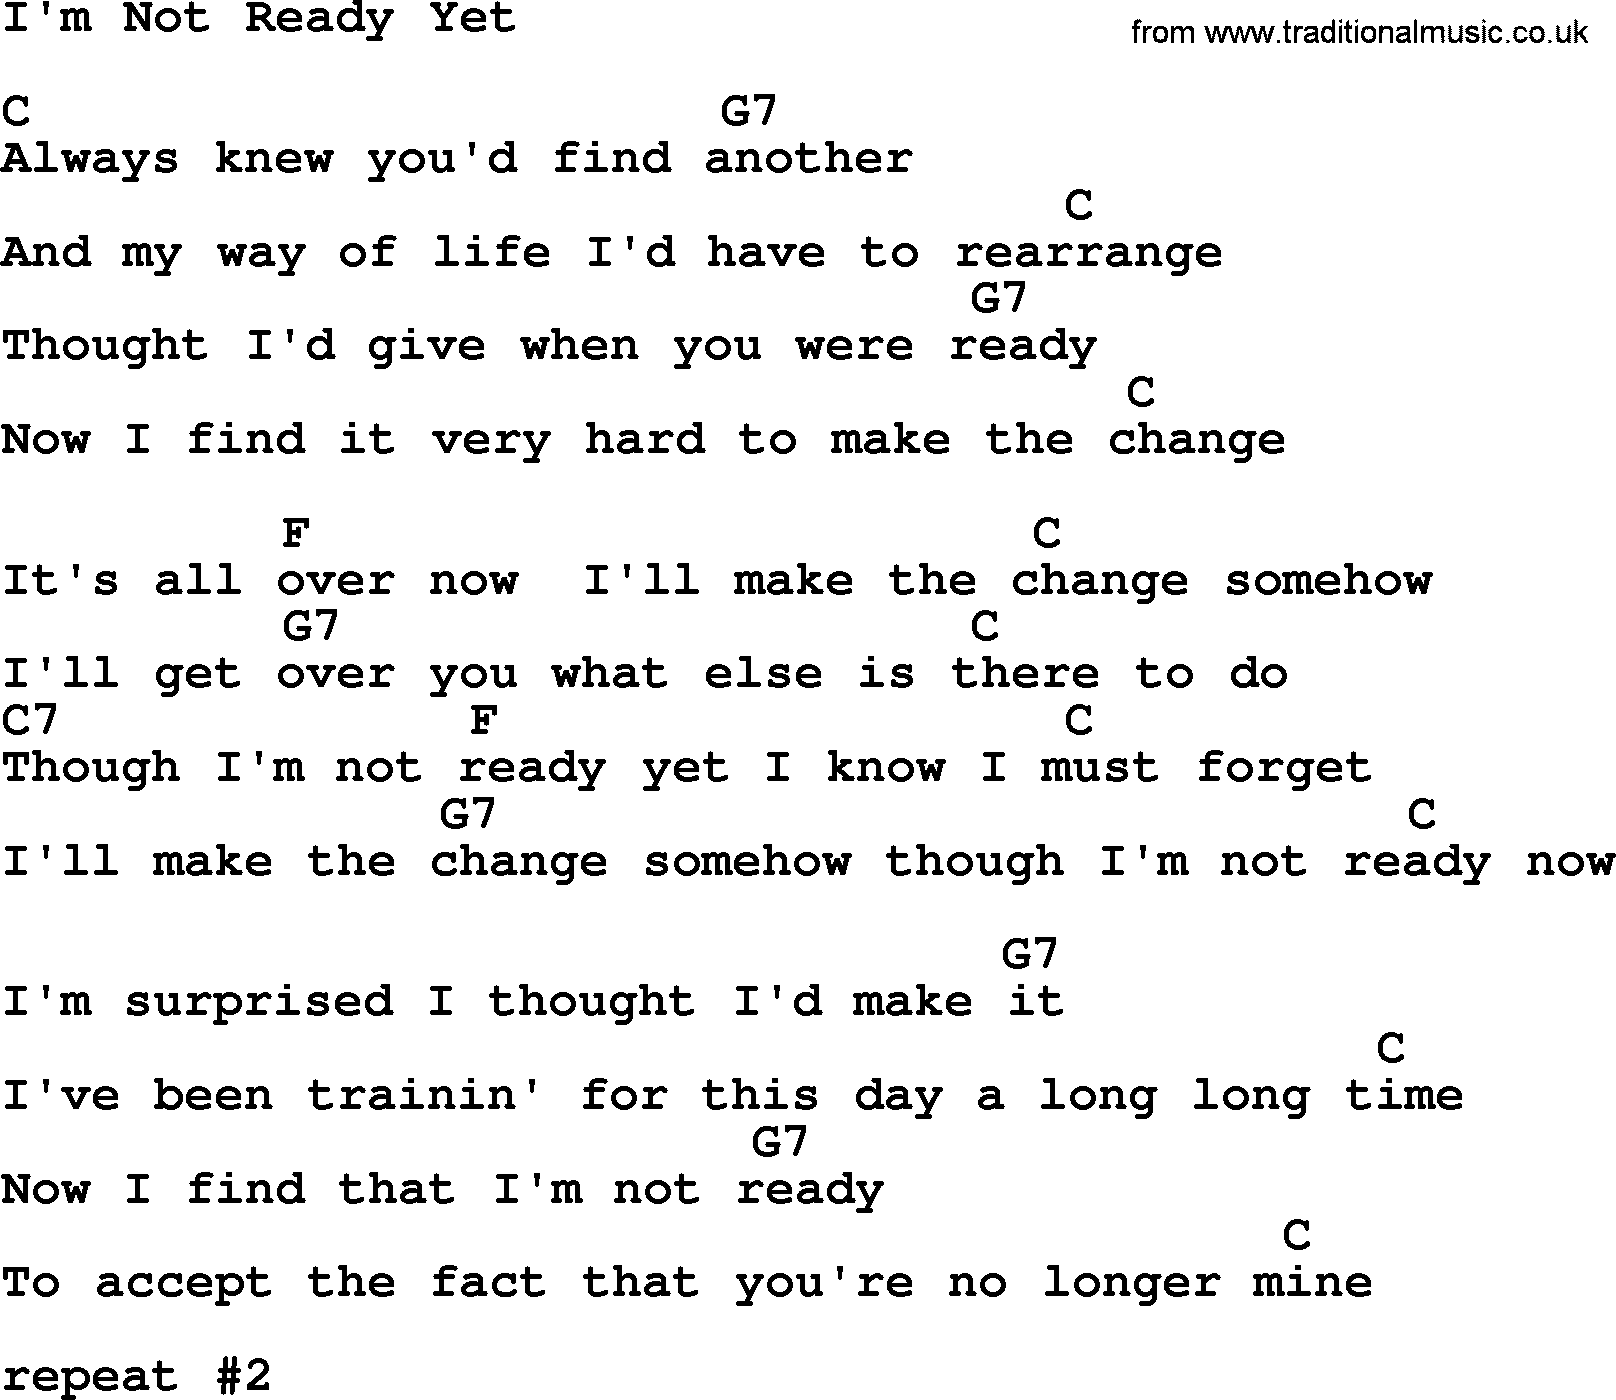 Marty Robbins song: I'm Not Ready Yet, lyrics and chords